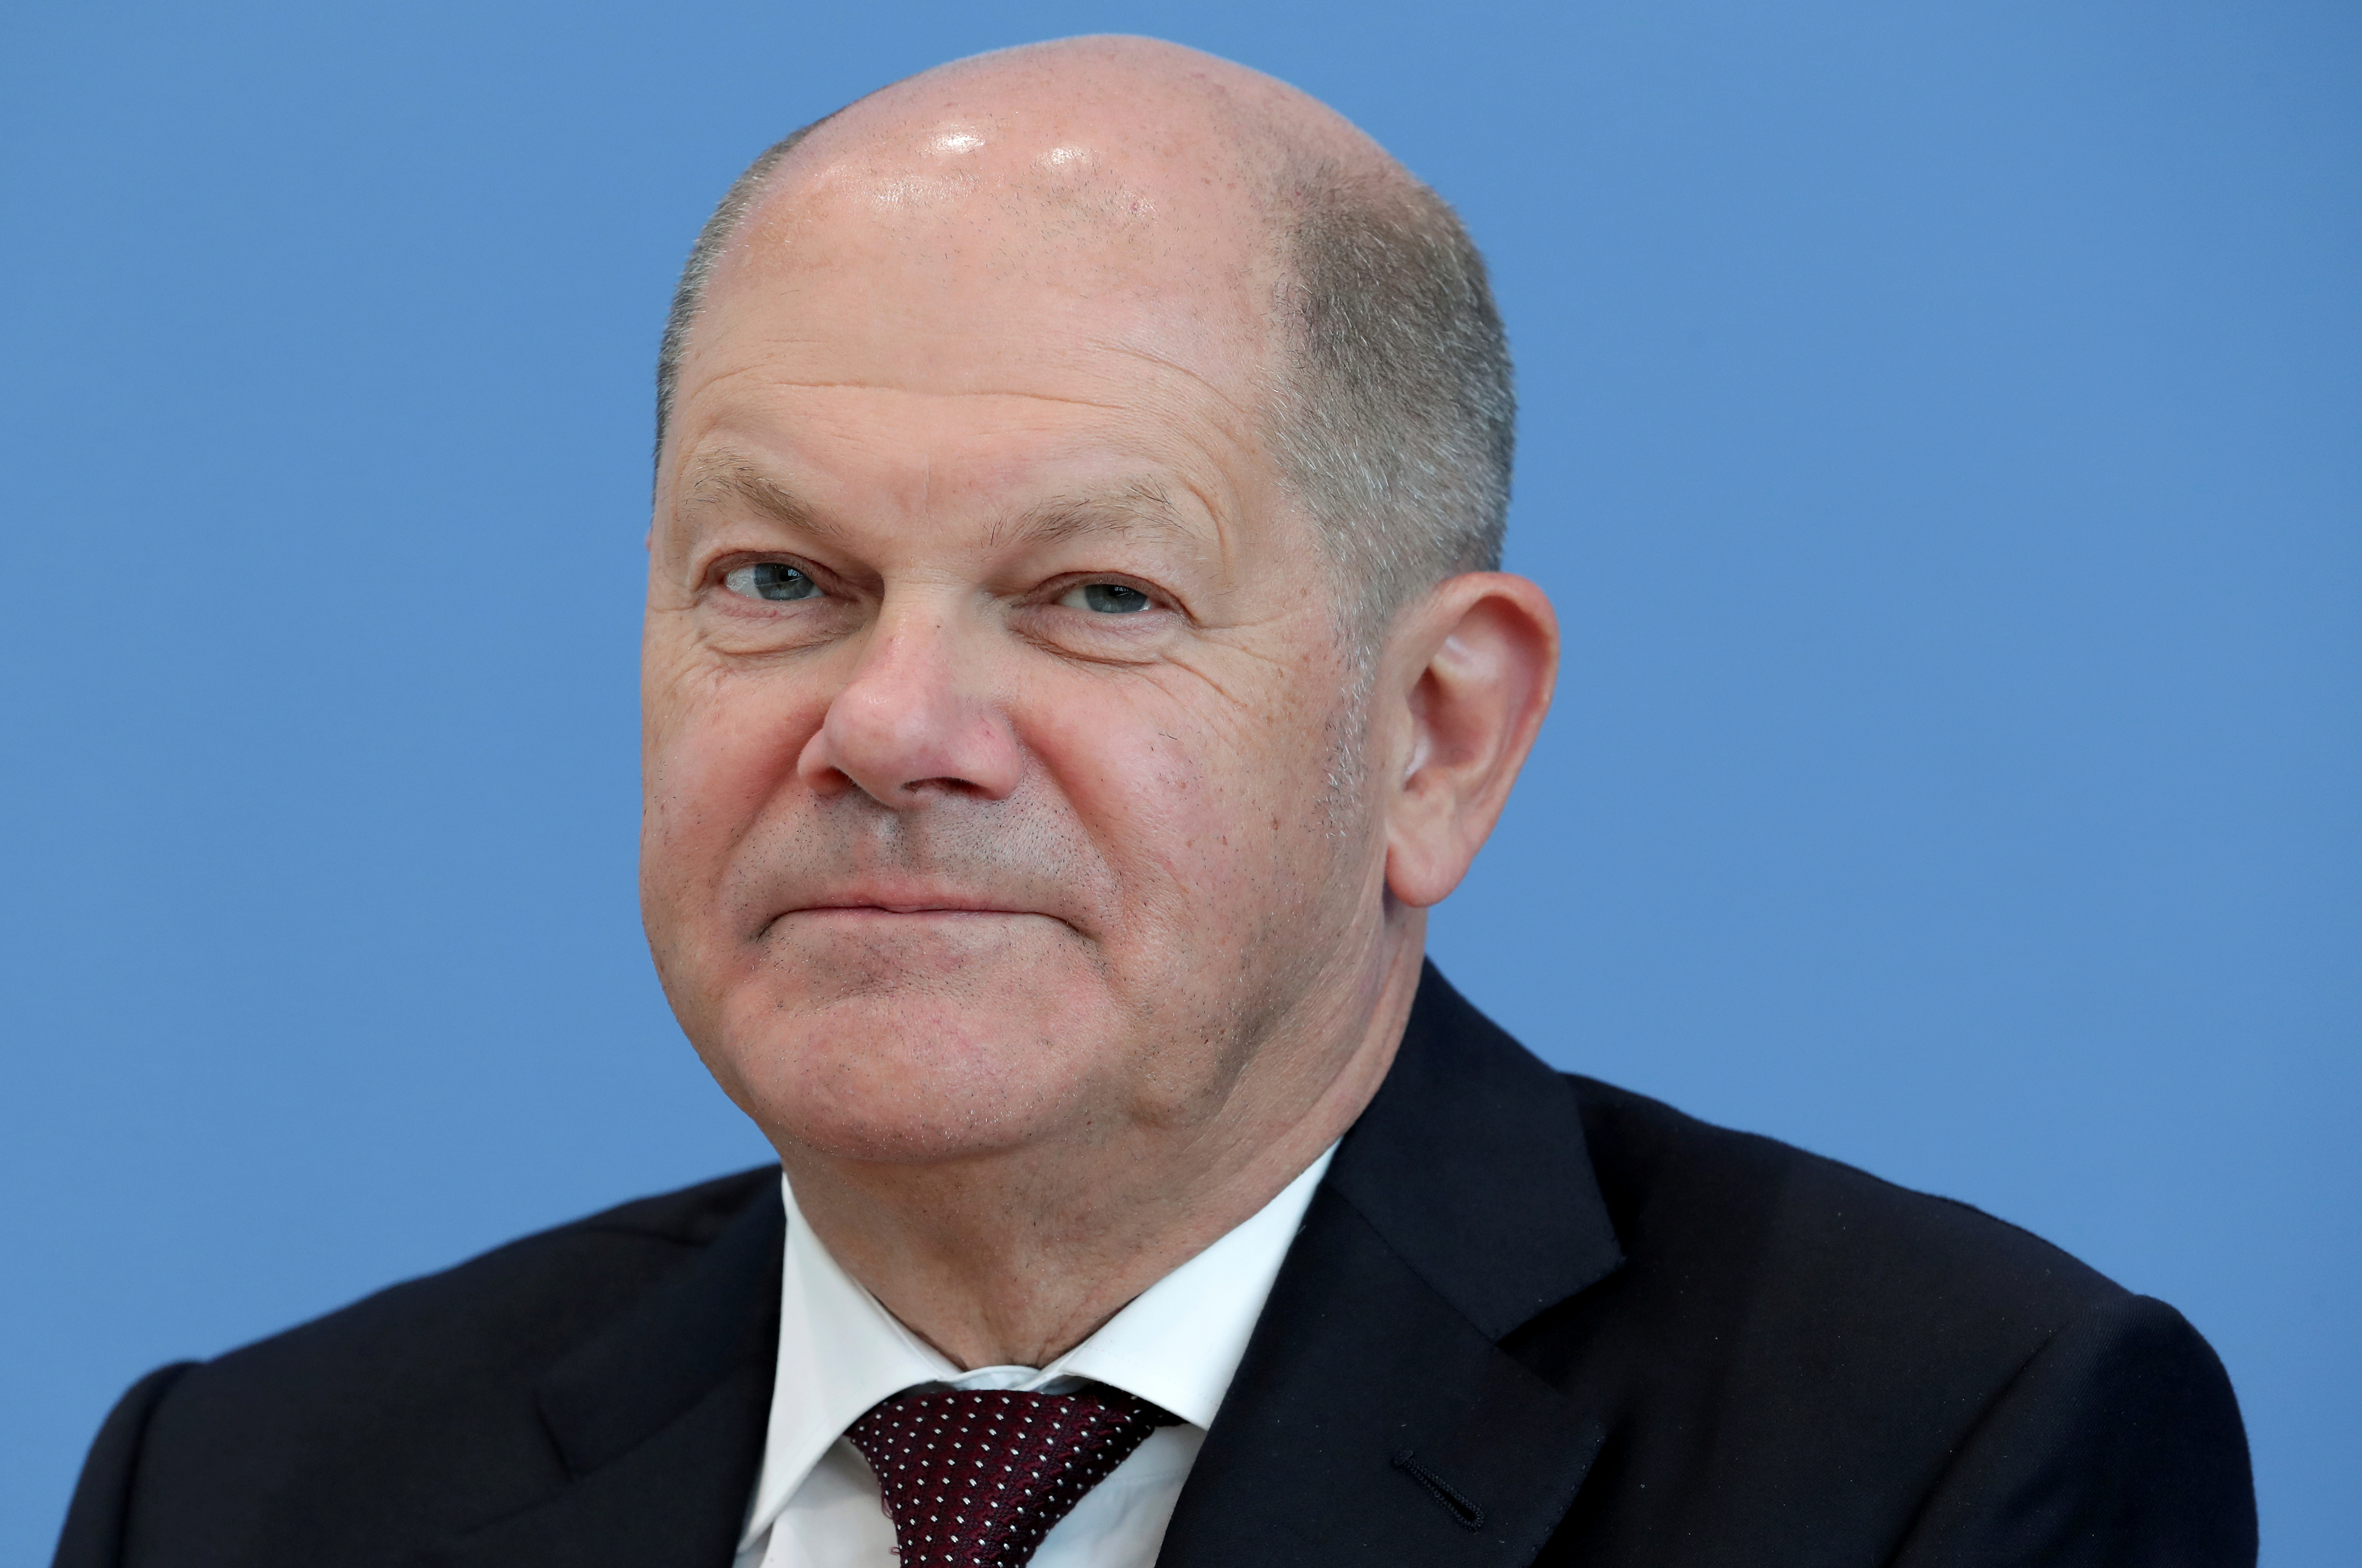 https://img6.s3wfg.com/web/img/images_uploaded/d/f/german-finance-minister-olaf-scholz-attends-a-news-conference-in-berlin.jpg